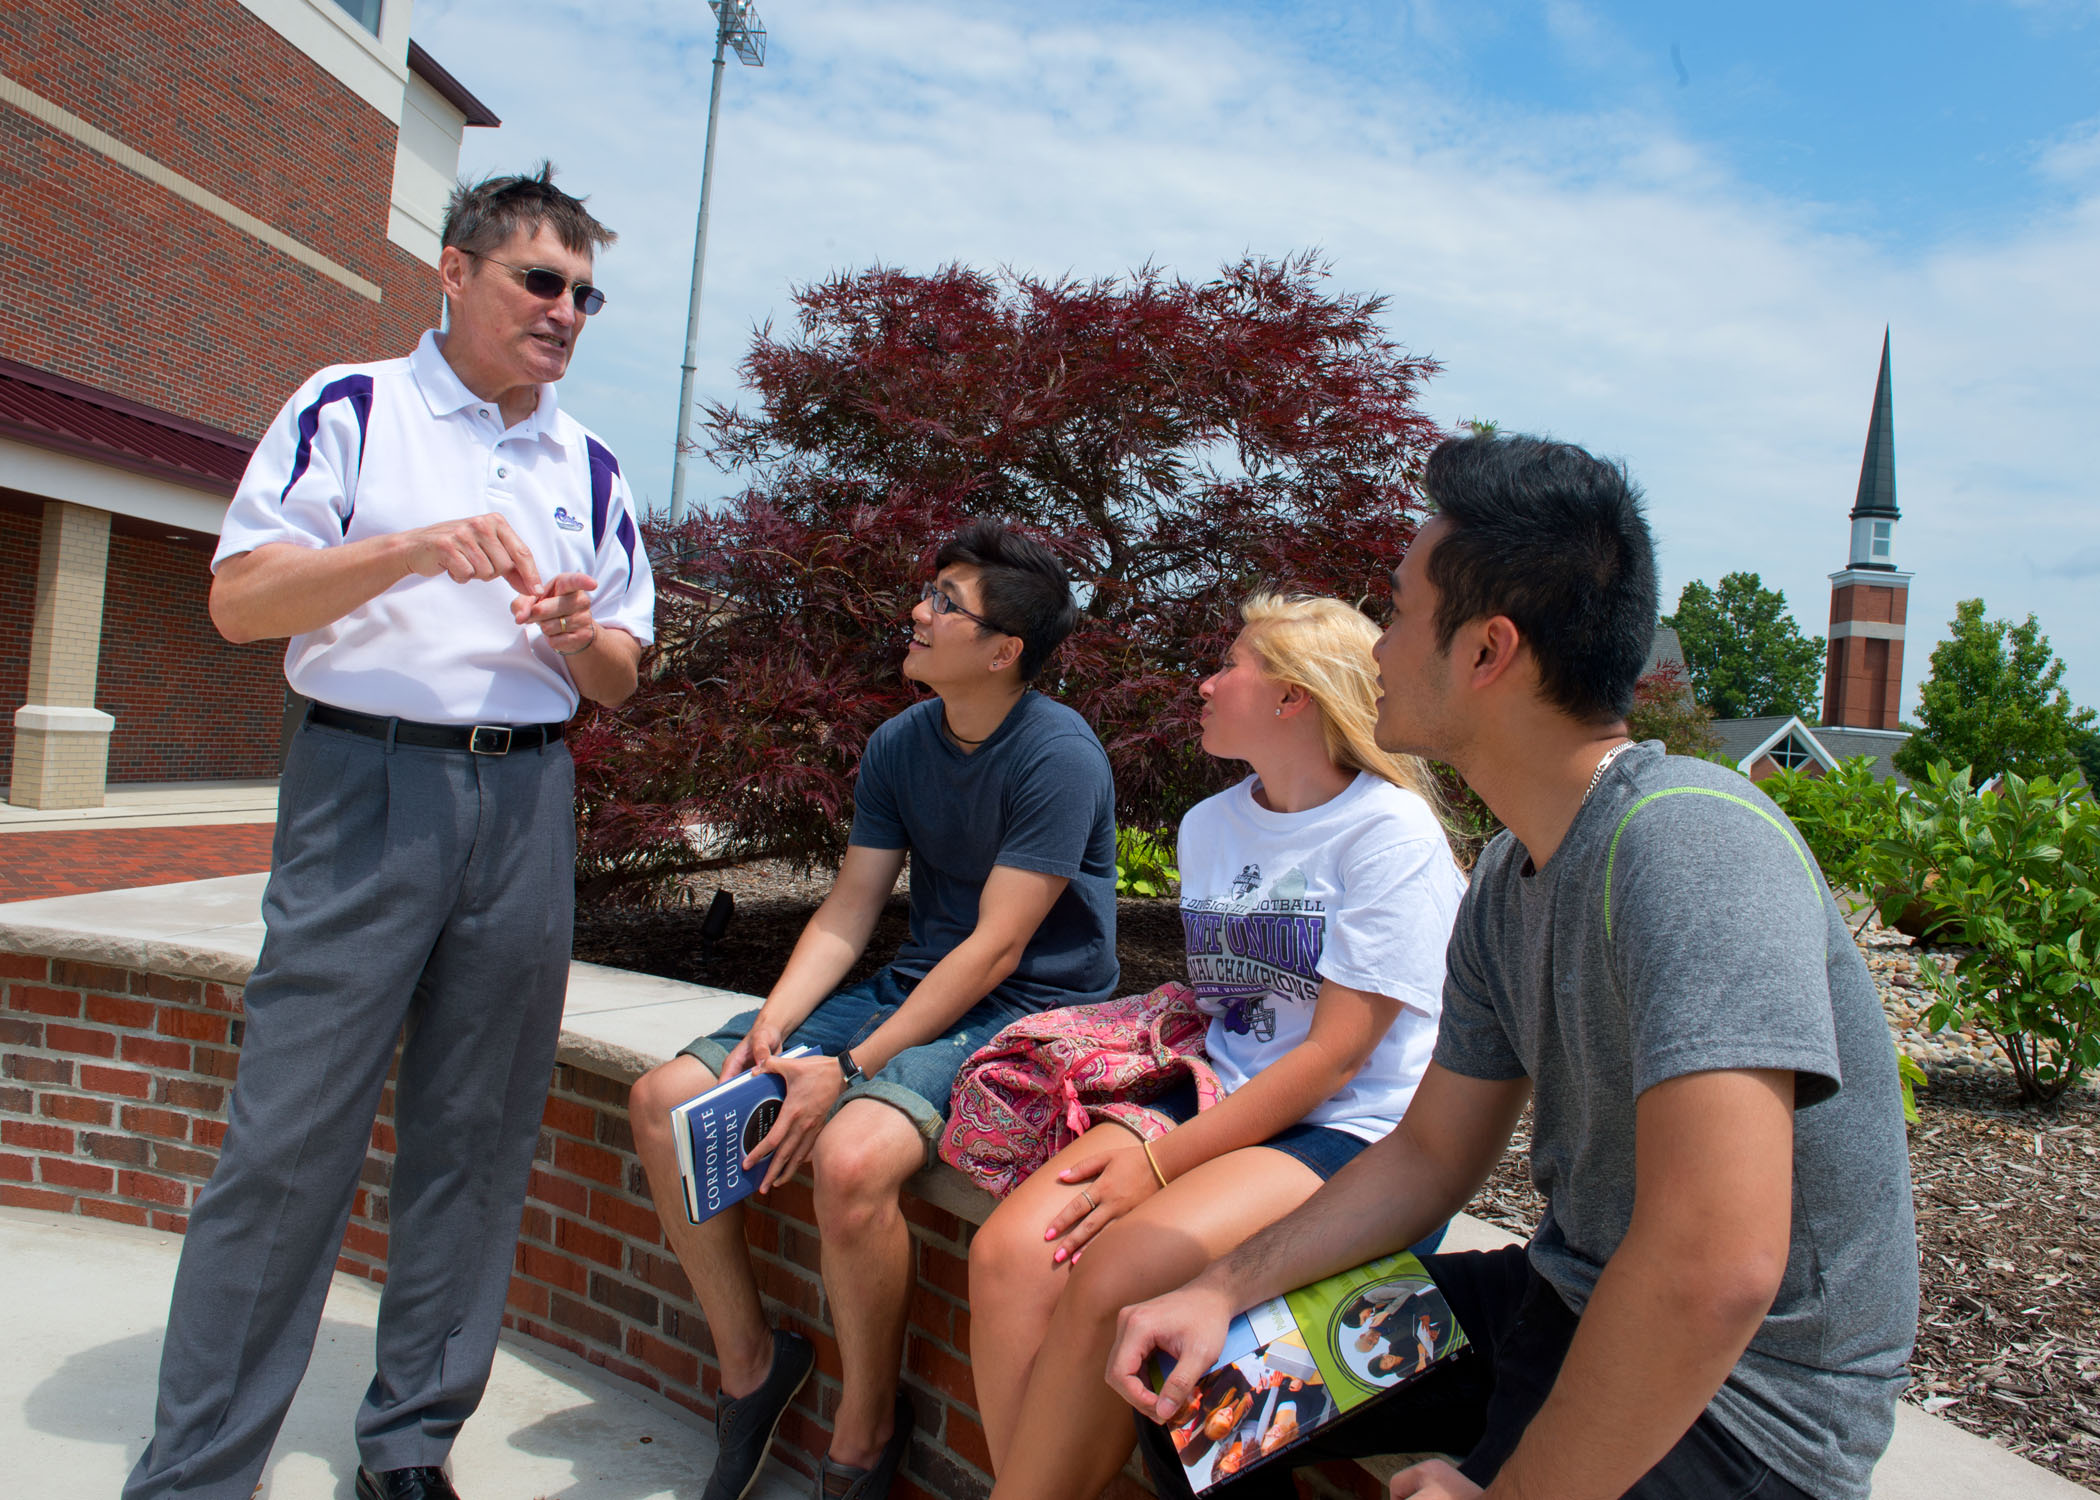 University of Mount Union students and professor outside